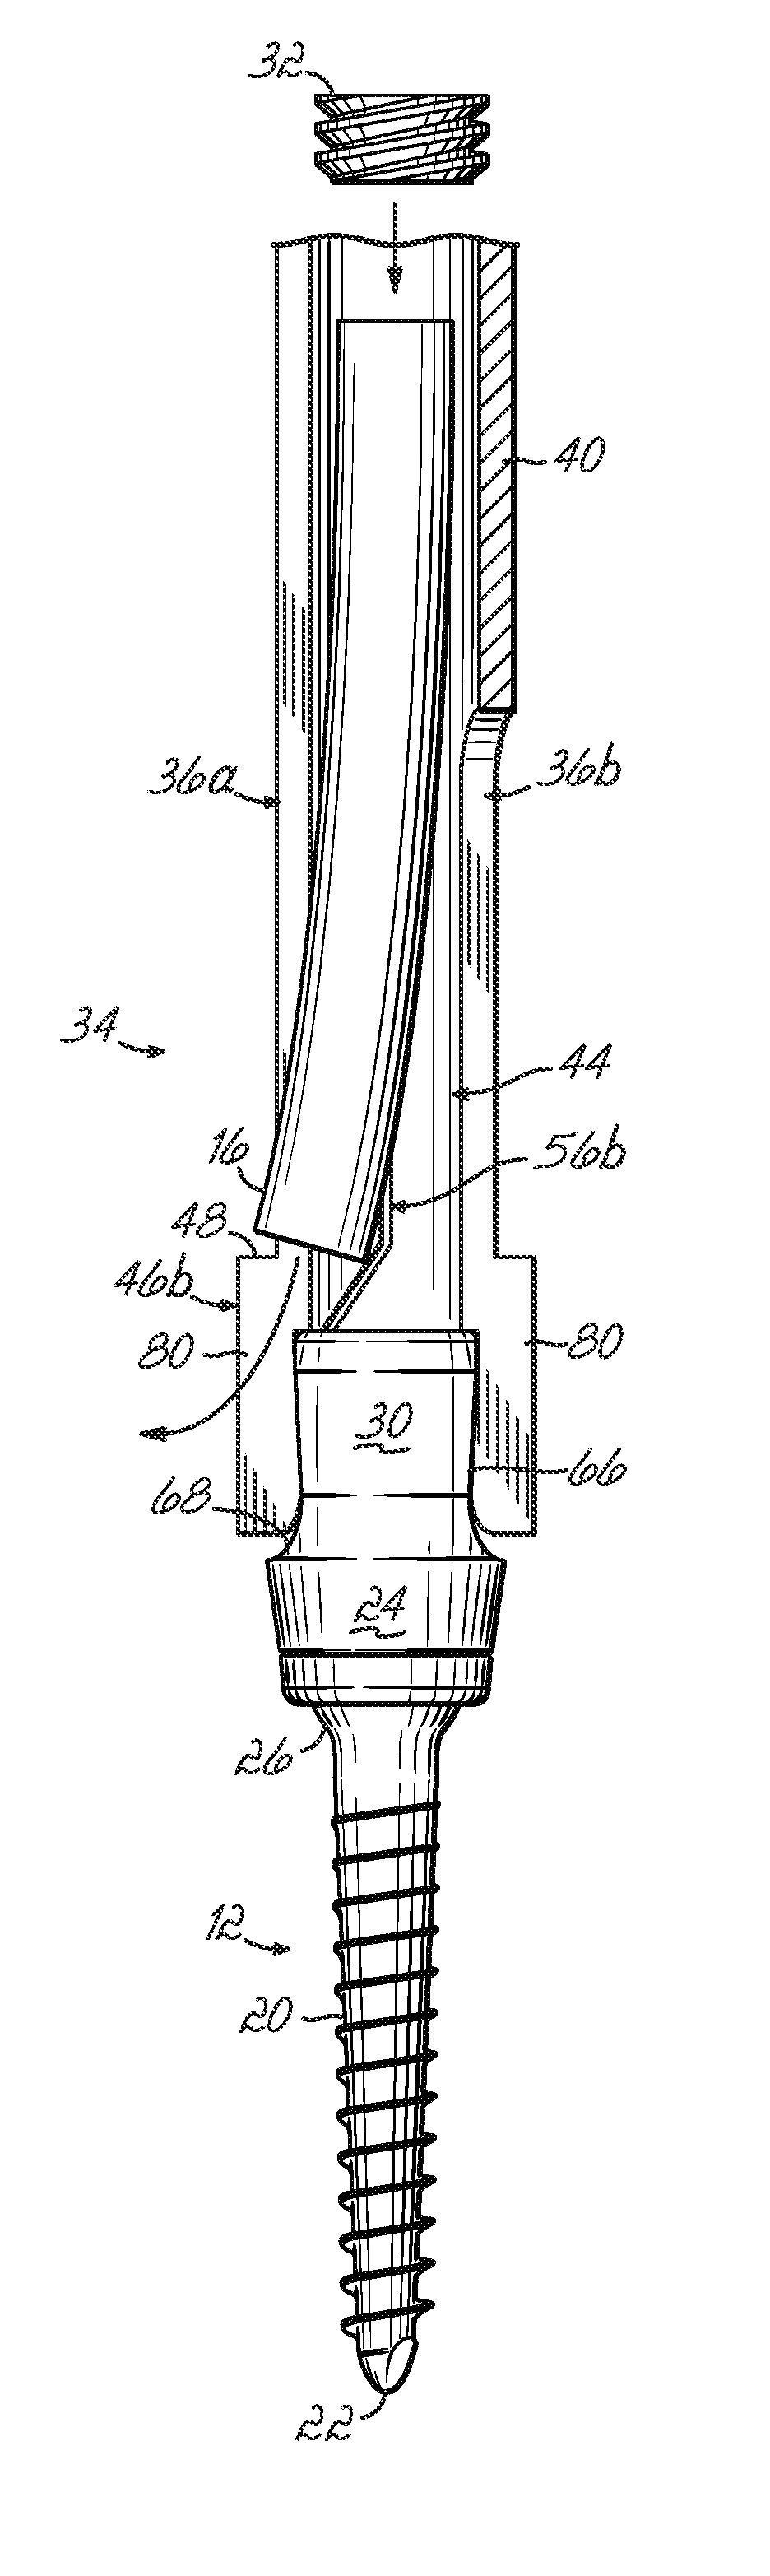 Minimally invasive vertebral anchor access system and associated method